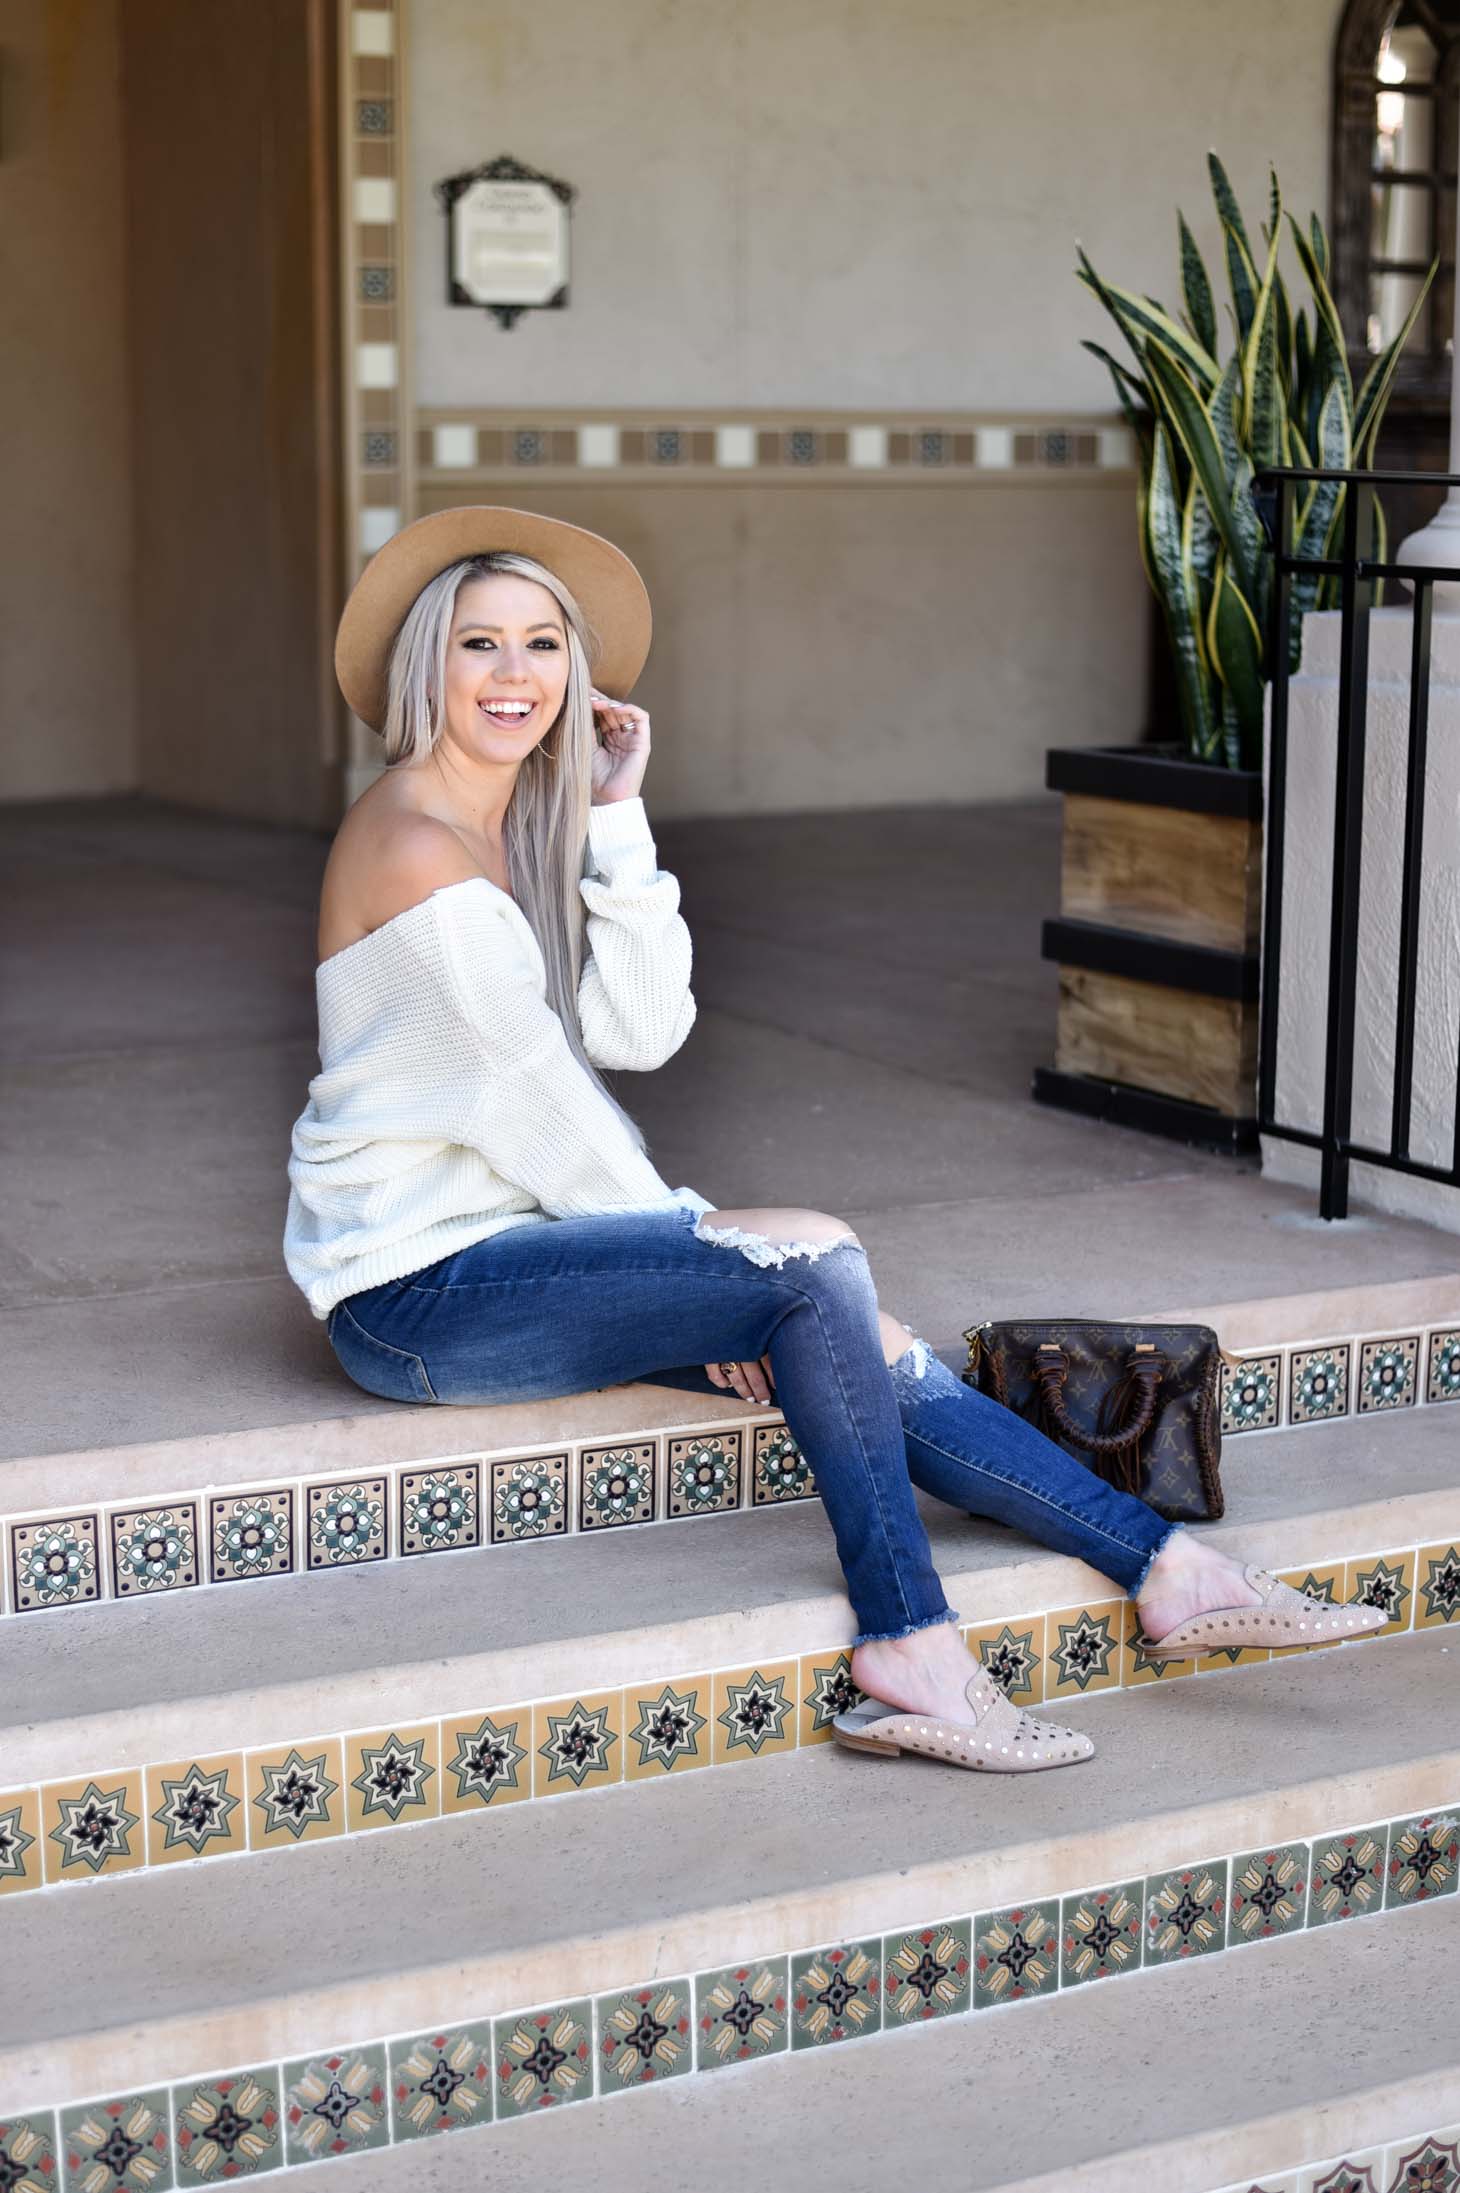 Erin Elizabeth of Wink and a Twirl shares the cutest off the shoulder sweater from Chicwish